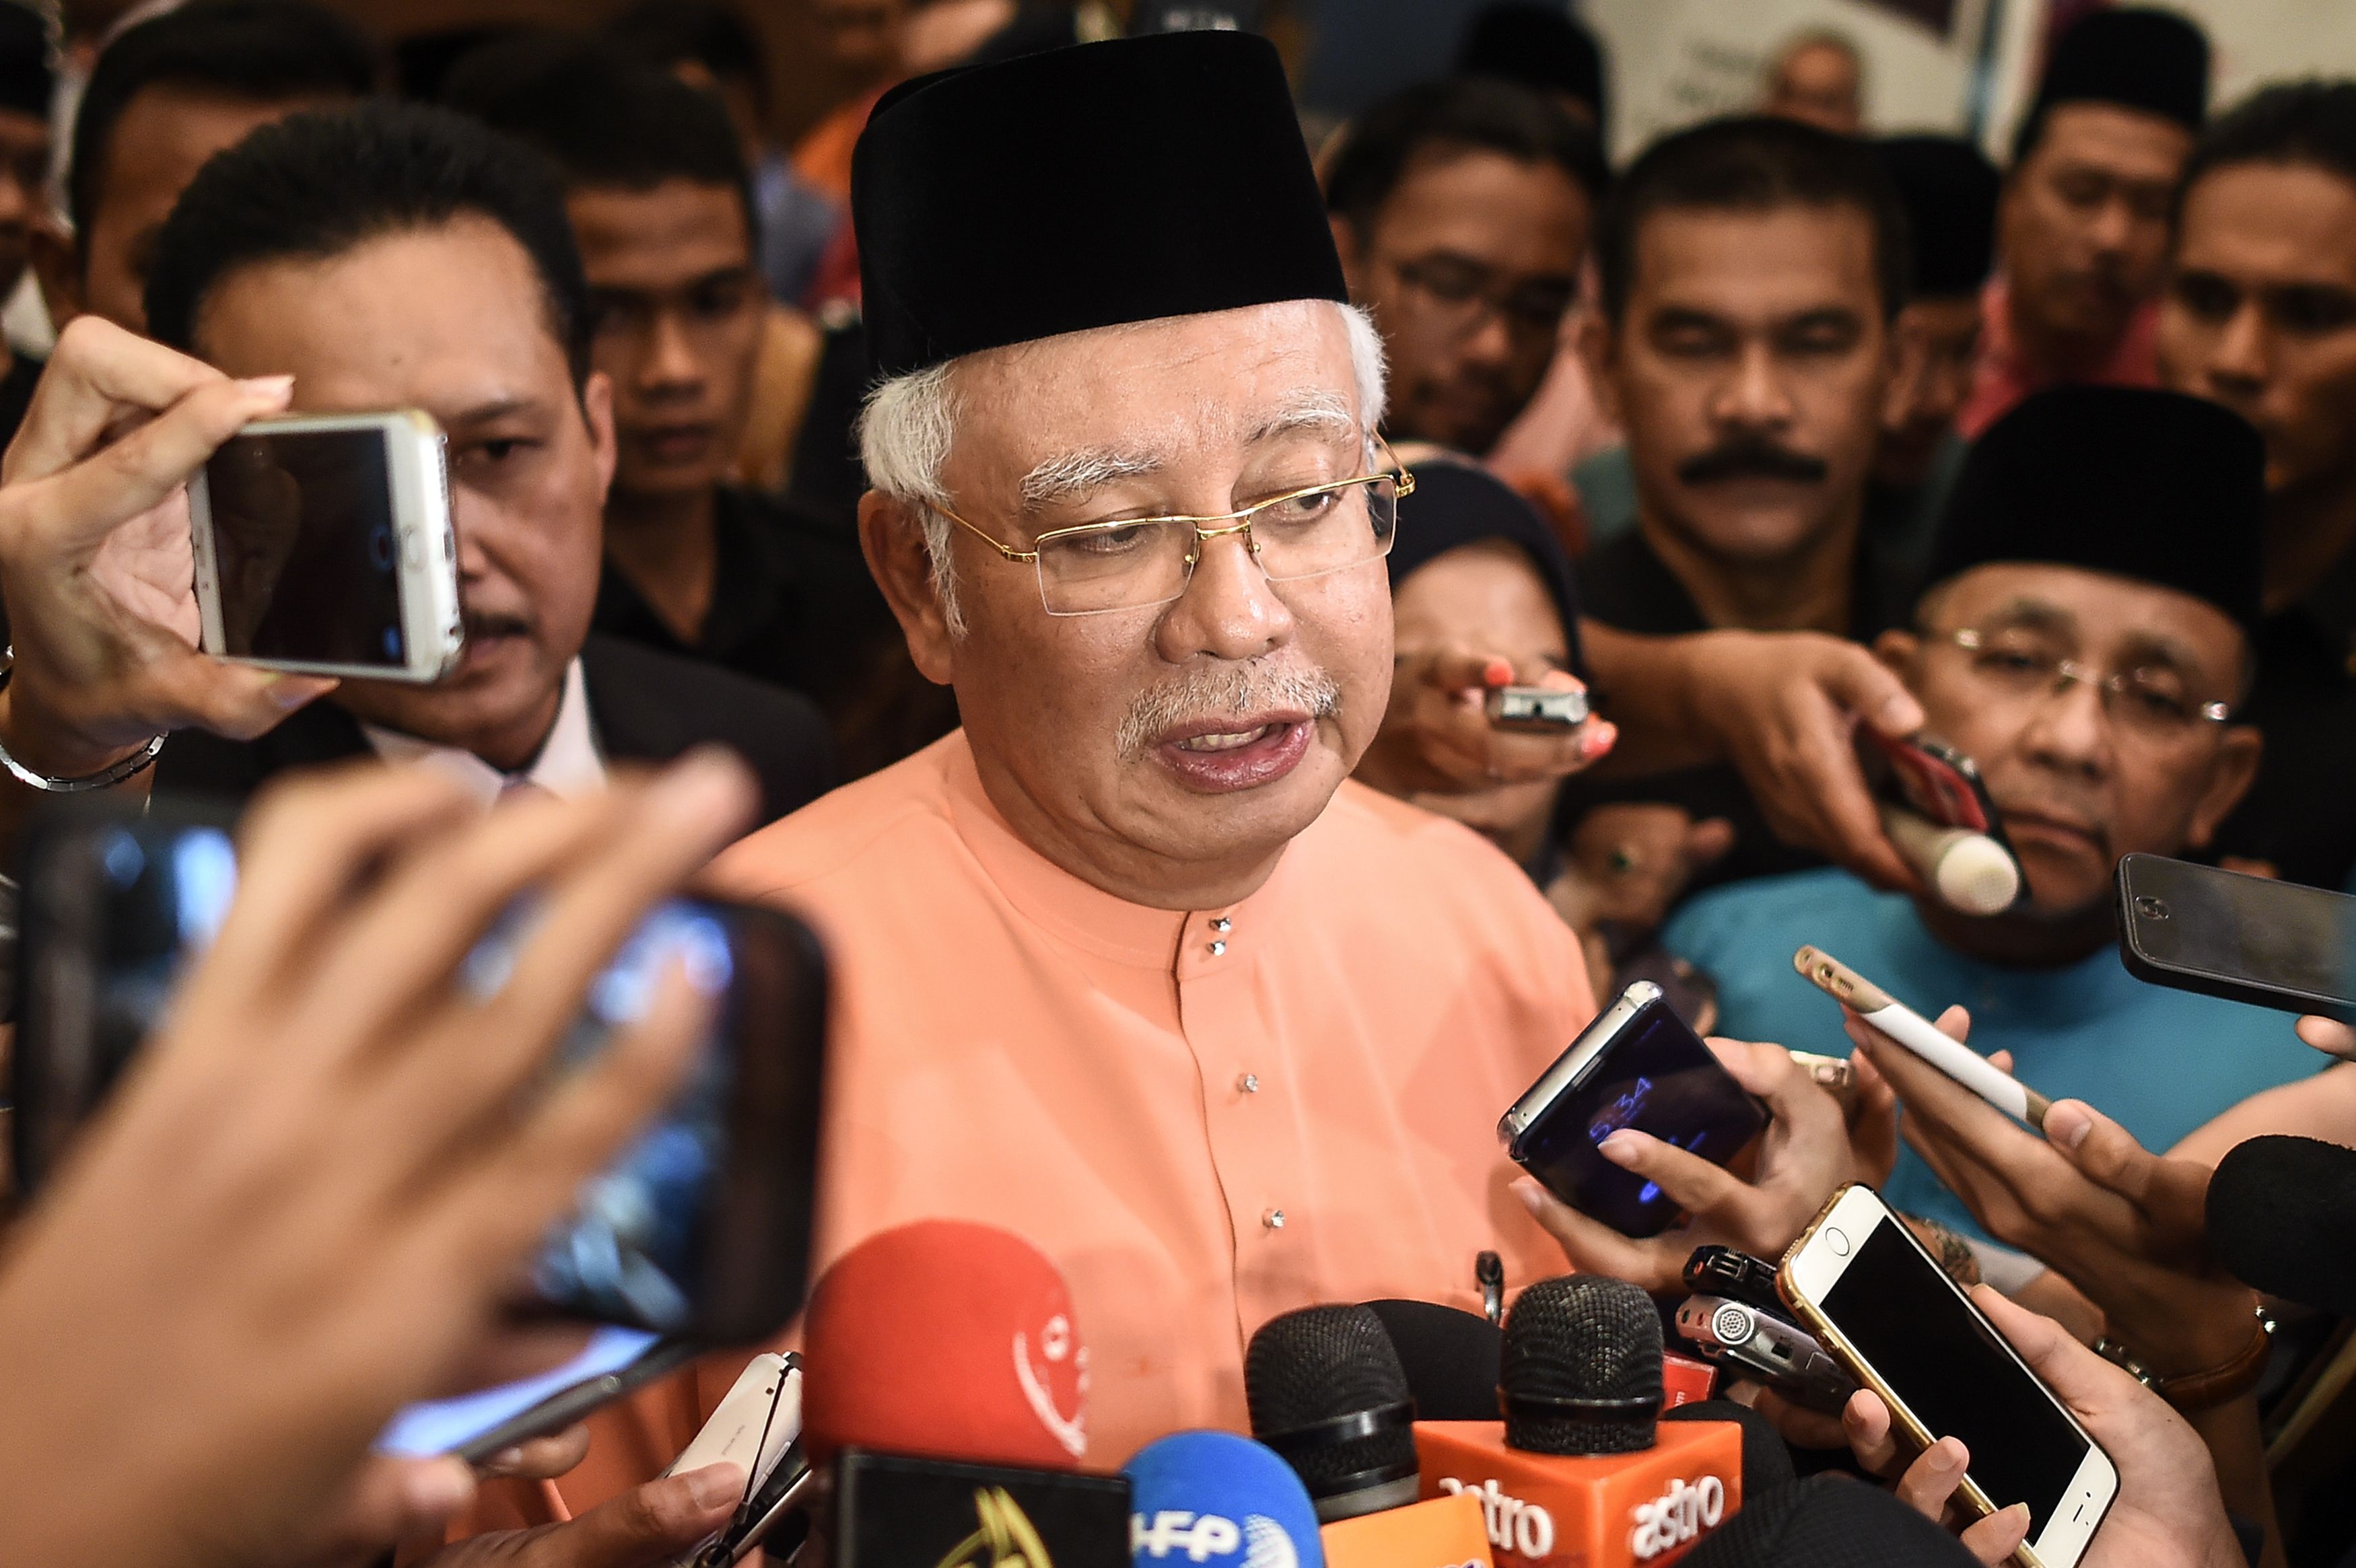 Malaysia's Prime Minister Najib Razak speaks to members of the media after an event in Kuala Lumpur on July 21, 2016 (Mohd Rasfan—AFP/Getty Images)